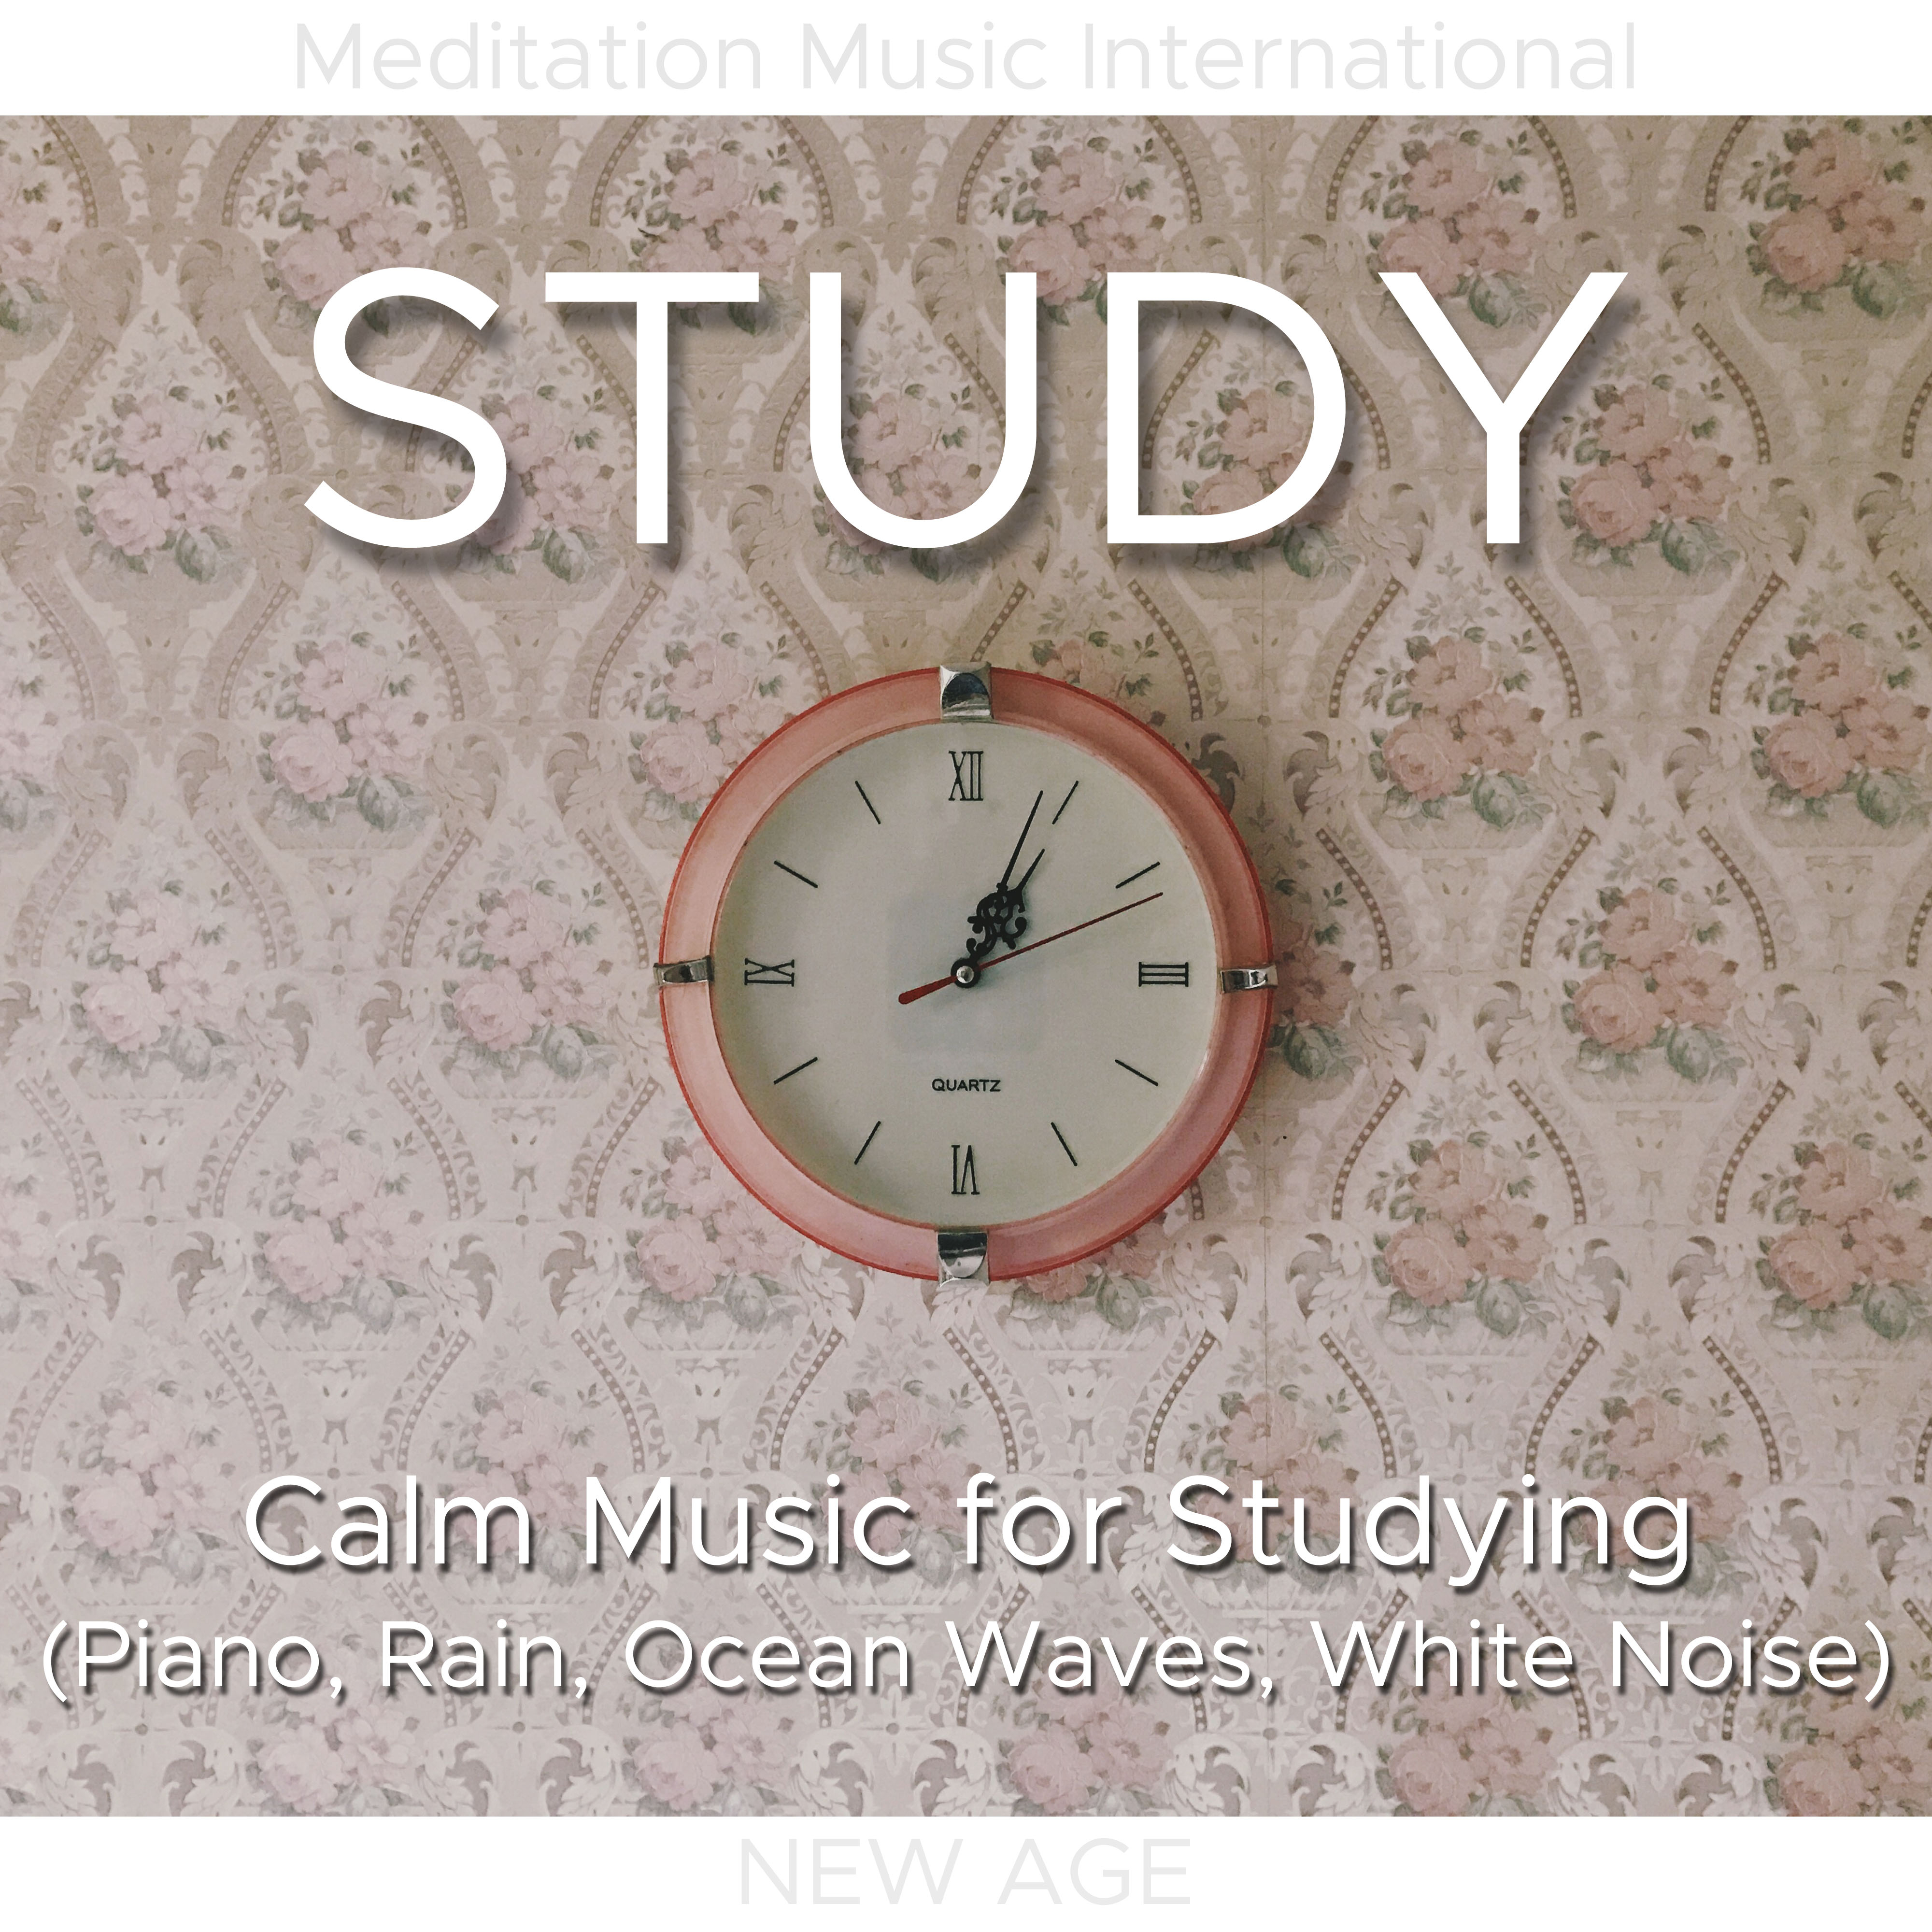 Study - Calm Music for Studying (Piano, Rain, Ocean Waves, White Noise)